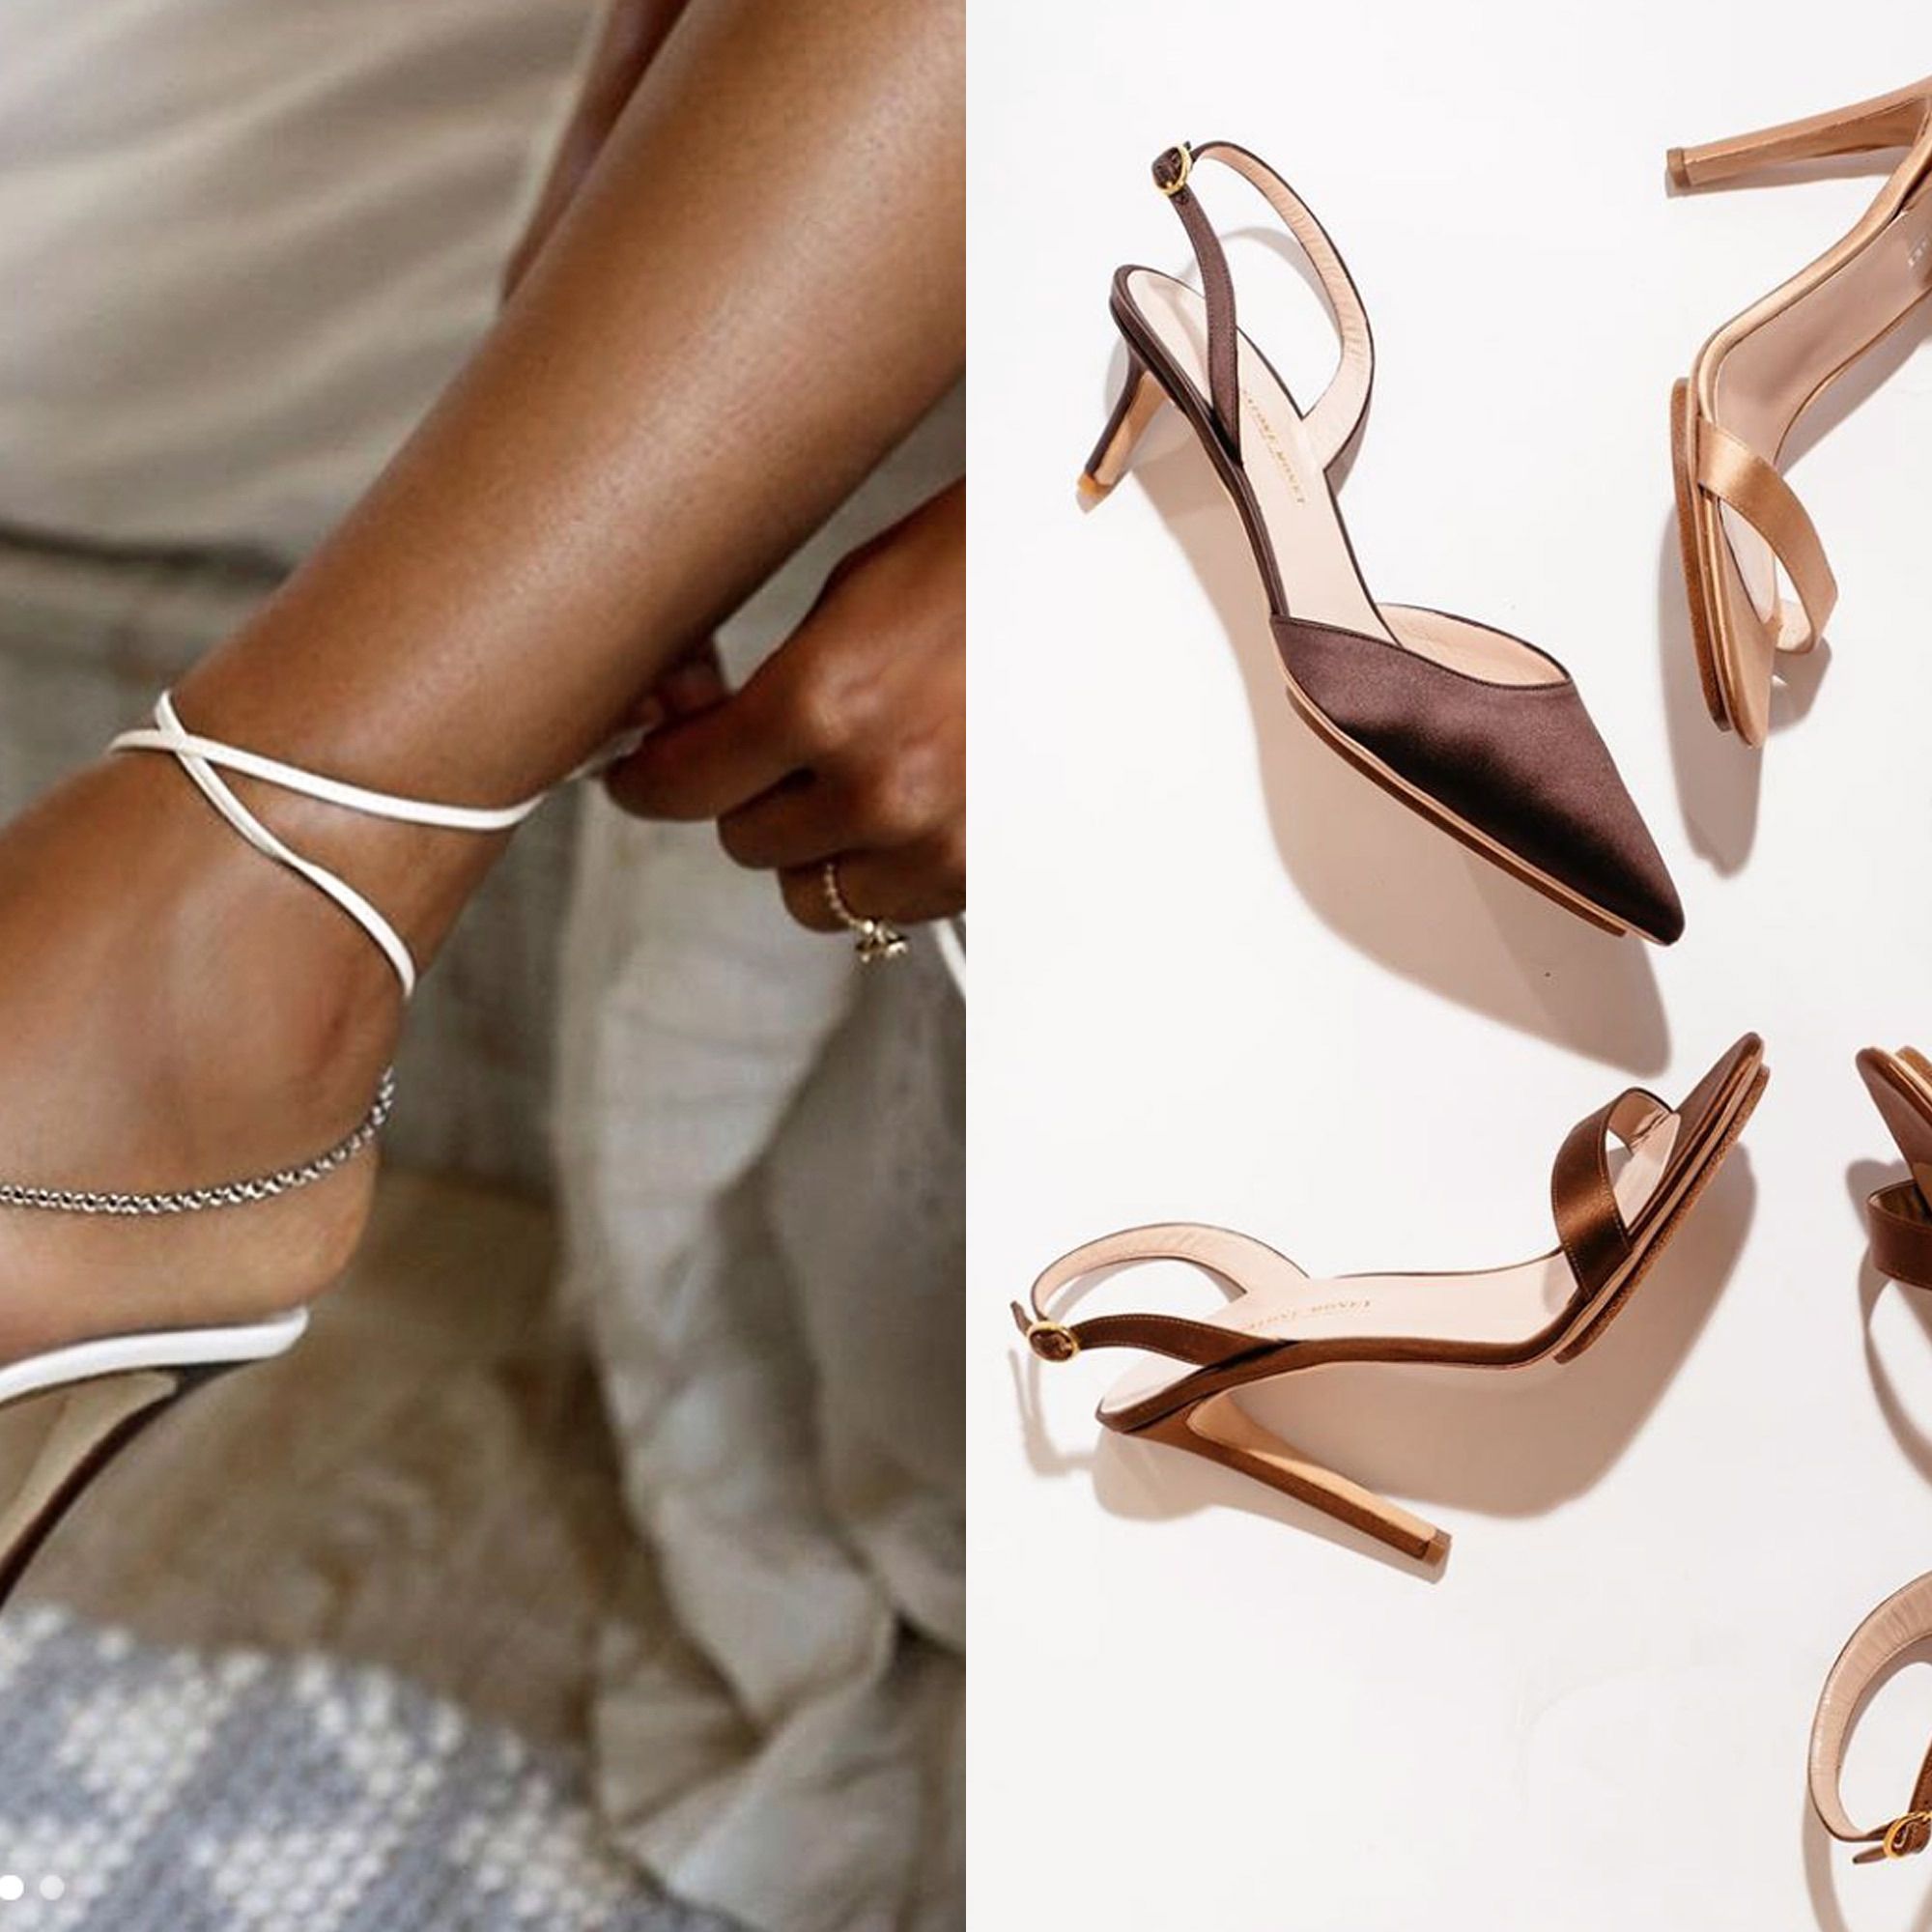 19 Black-Owned Shoe Brands | of Black-Owned Businesses Marie Claire